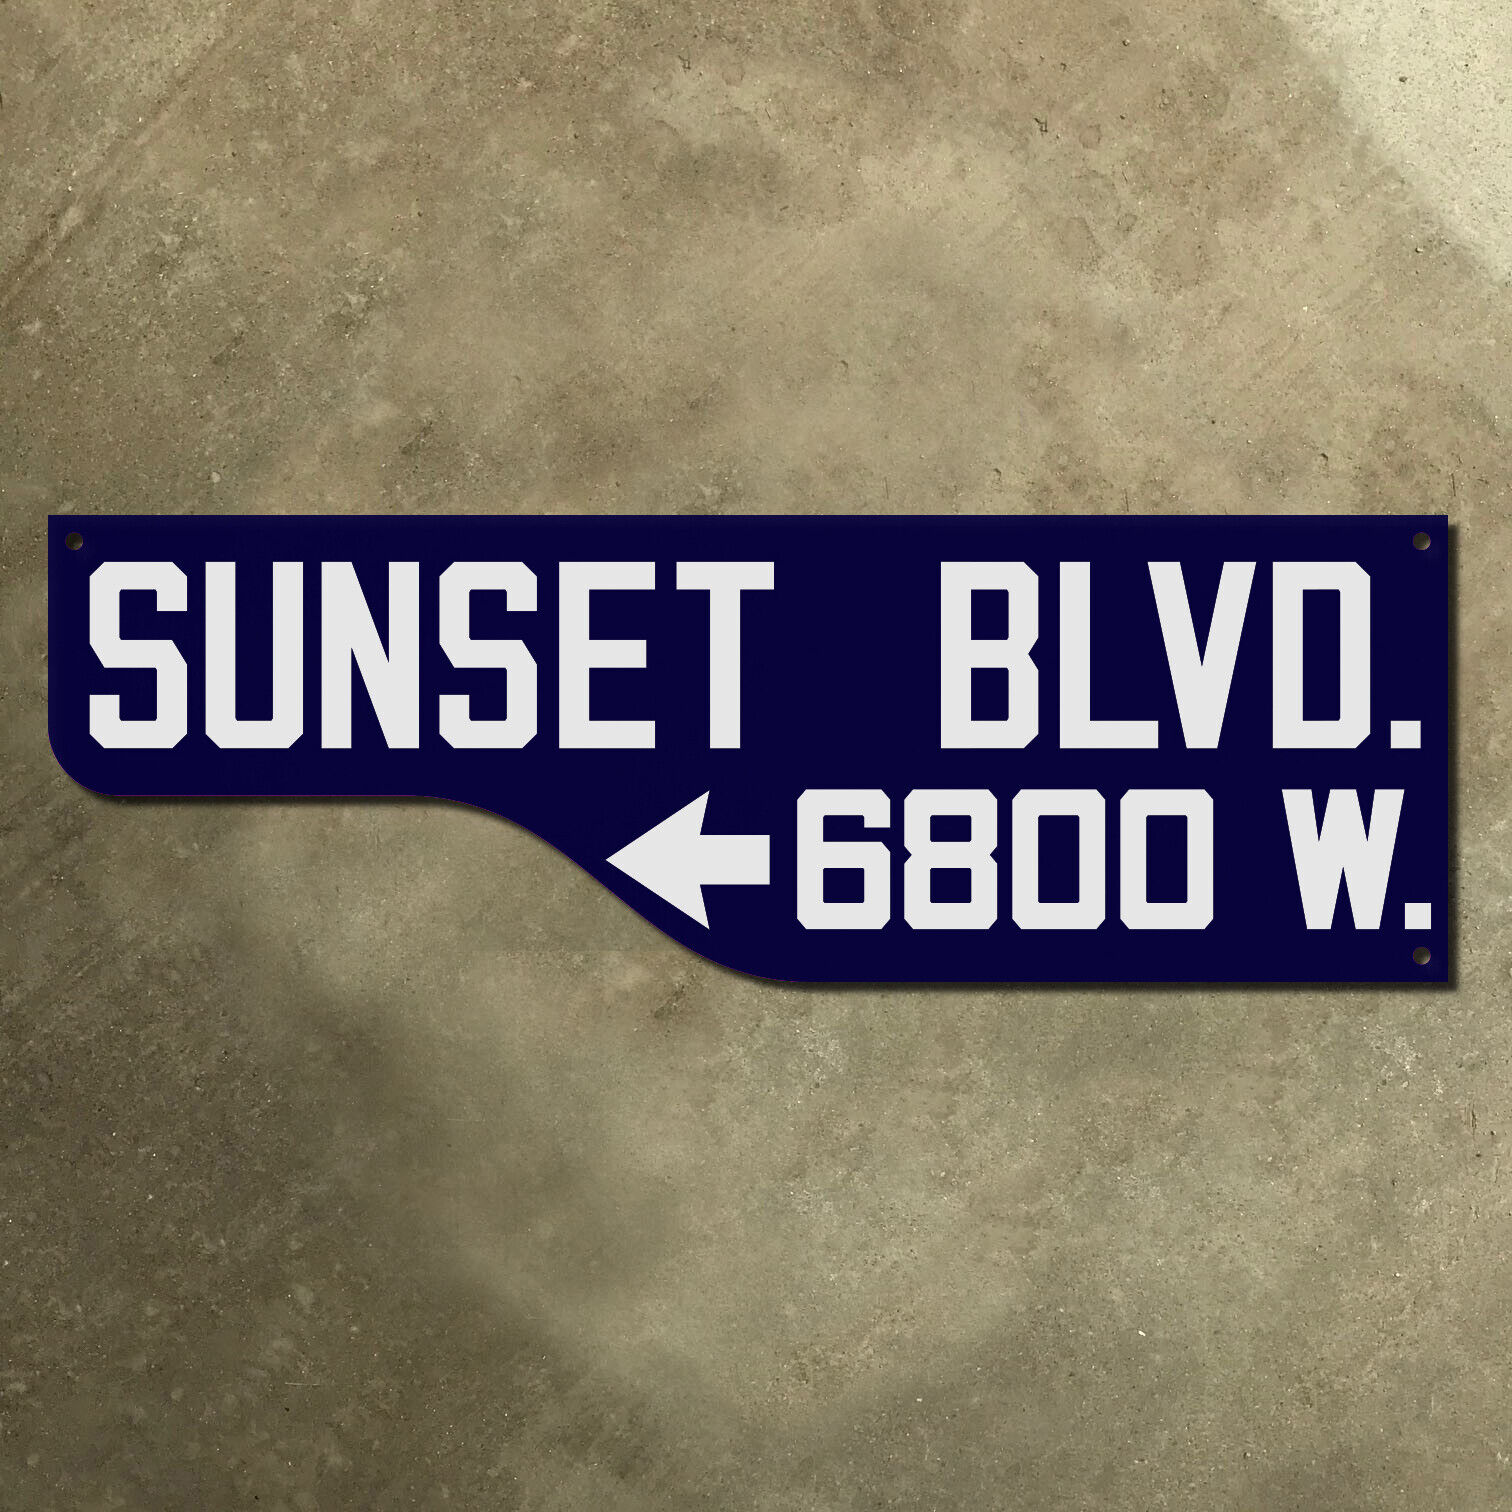 Los Angeles California 6800 Sunset Blvd blade road sign 1946 30x10 TWO SIDED